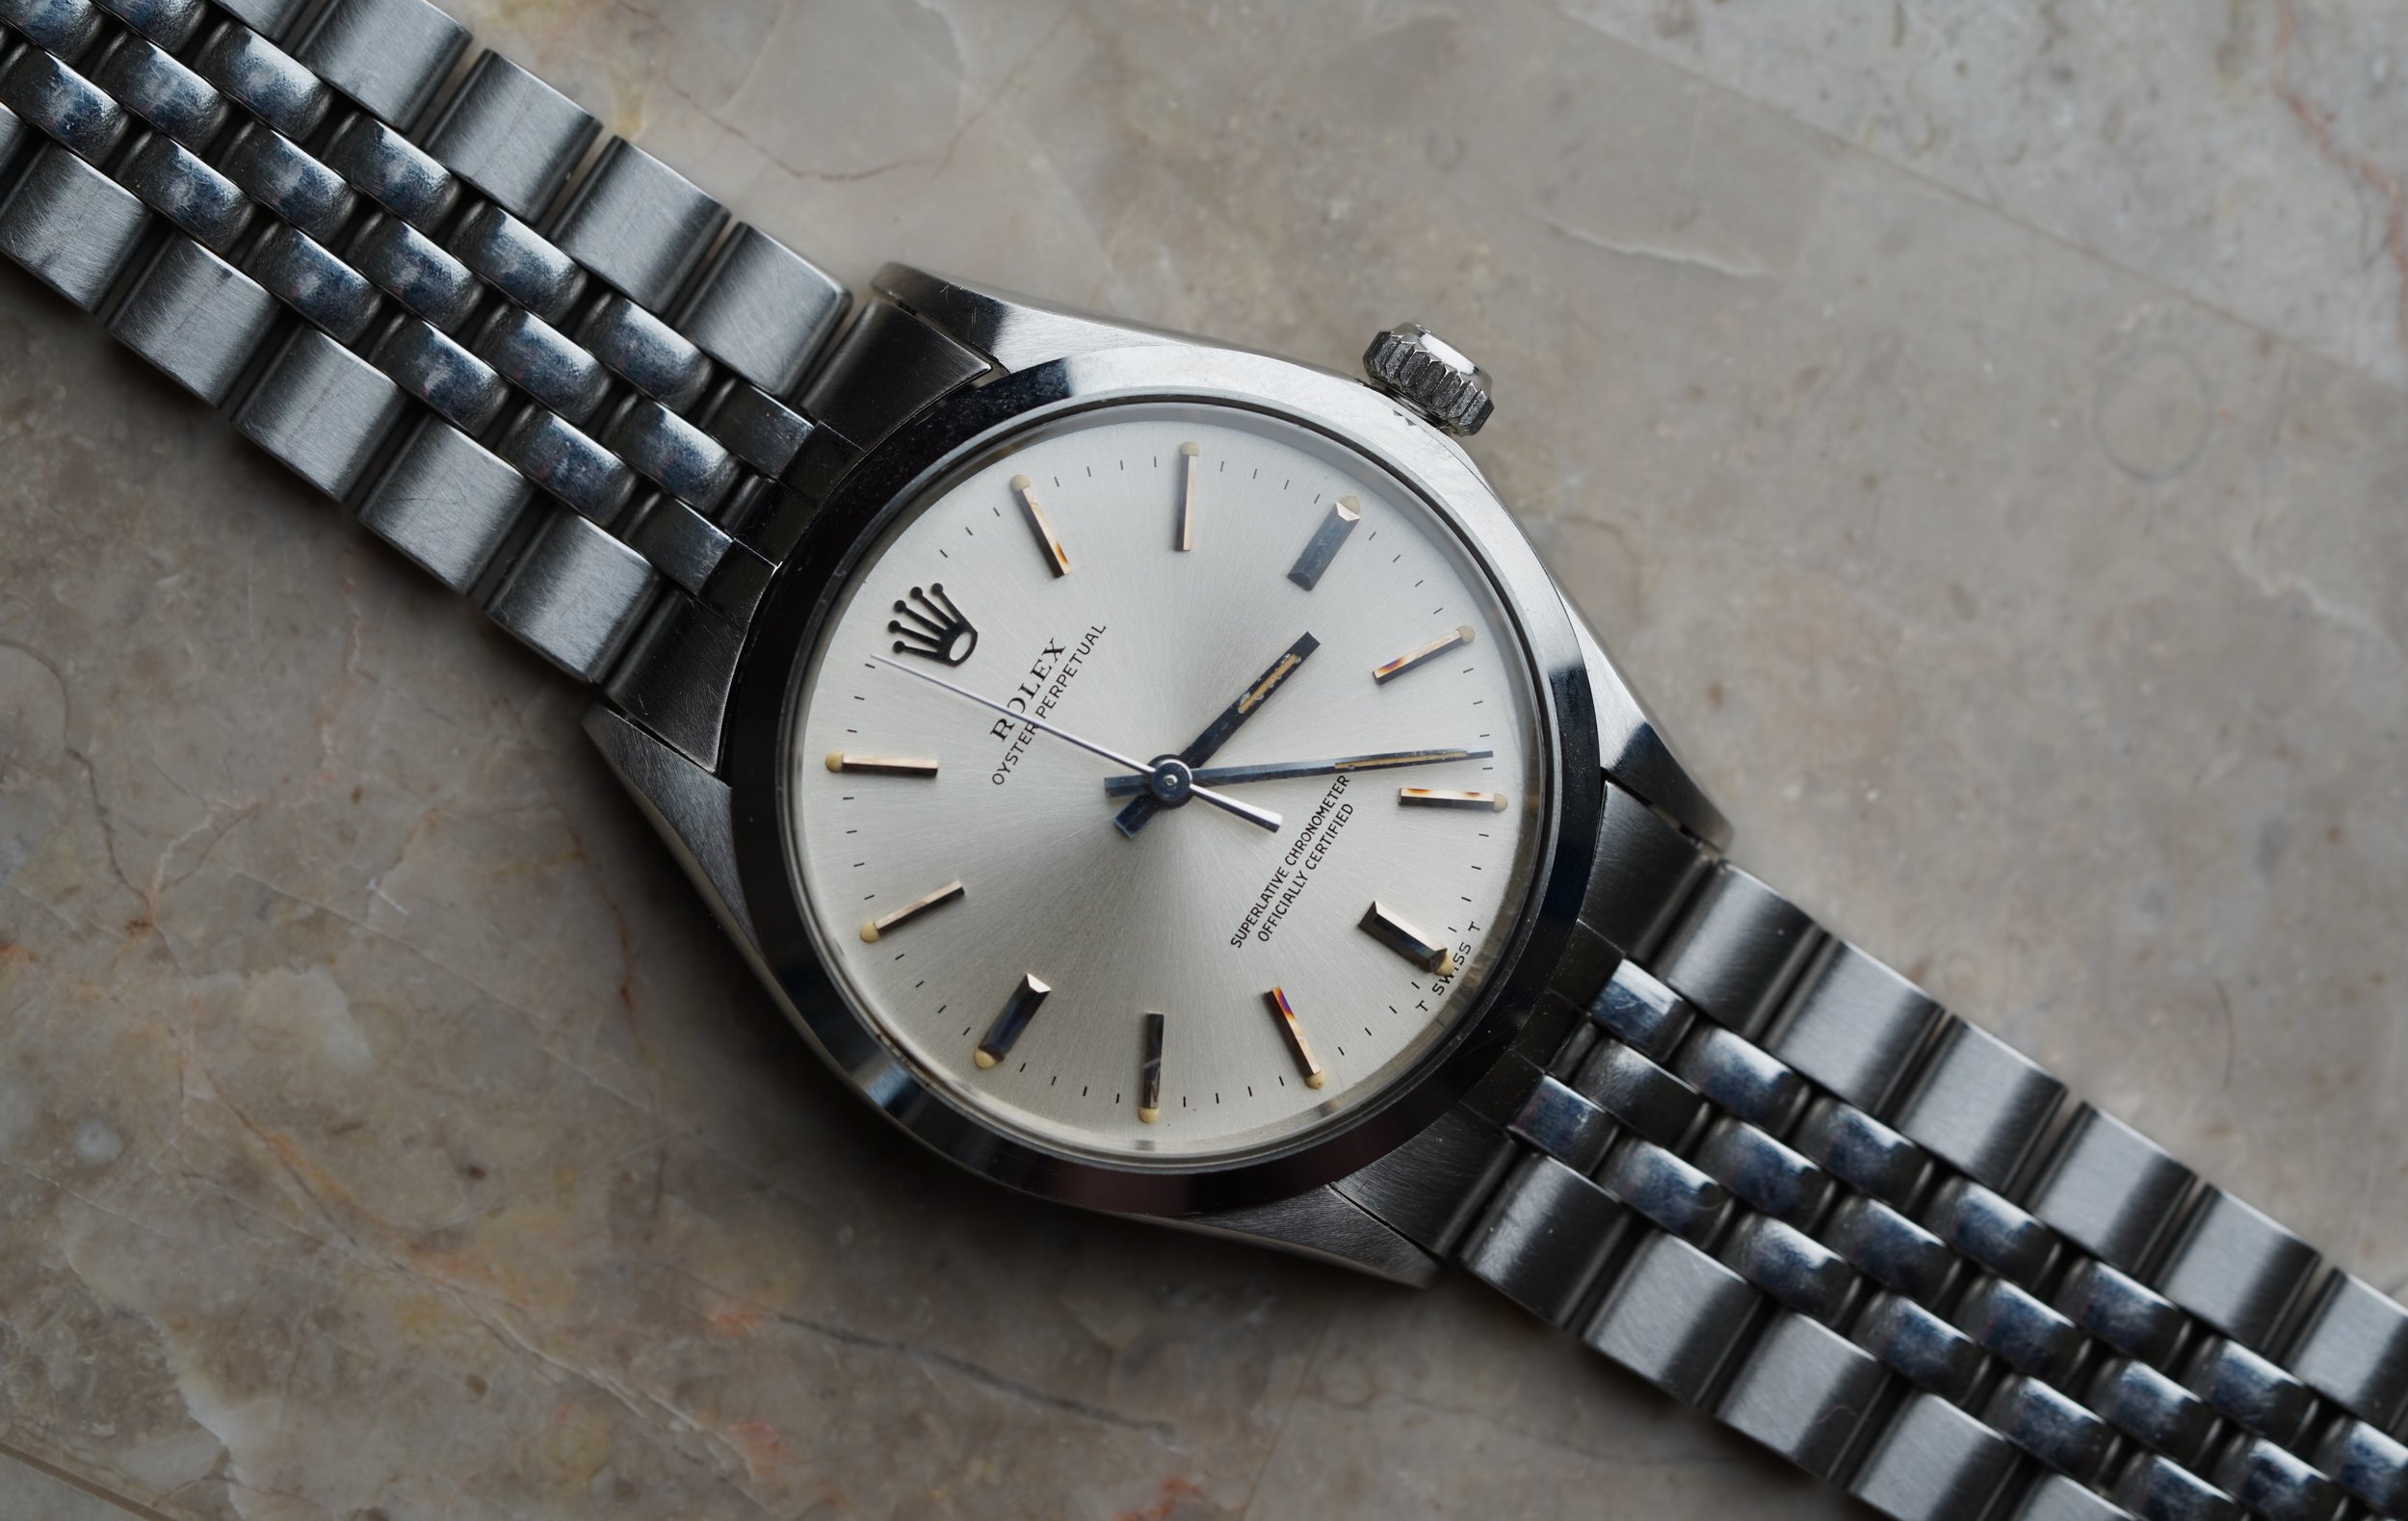 Collector's Guide: Oyster Perpetual Reference 1018